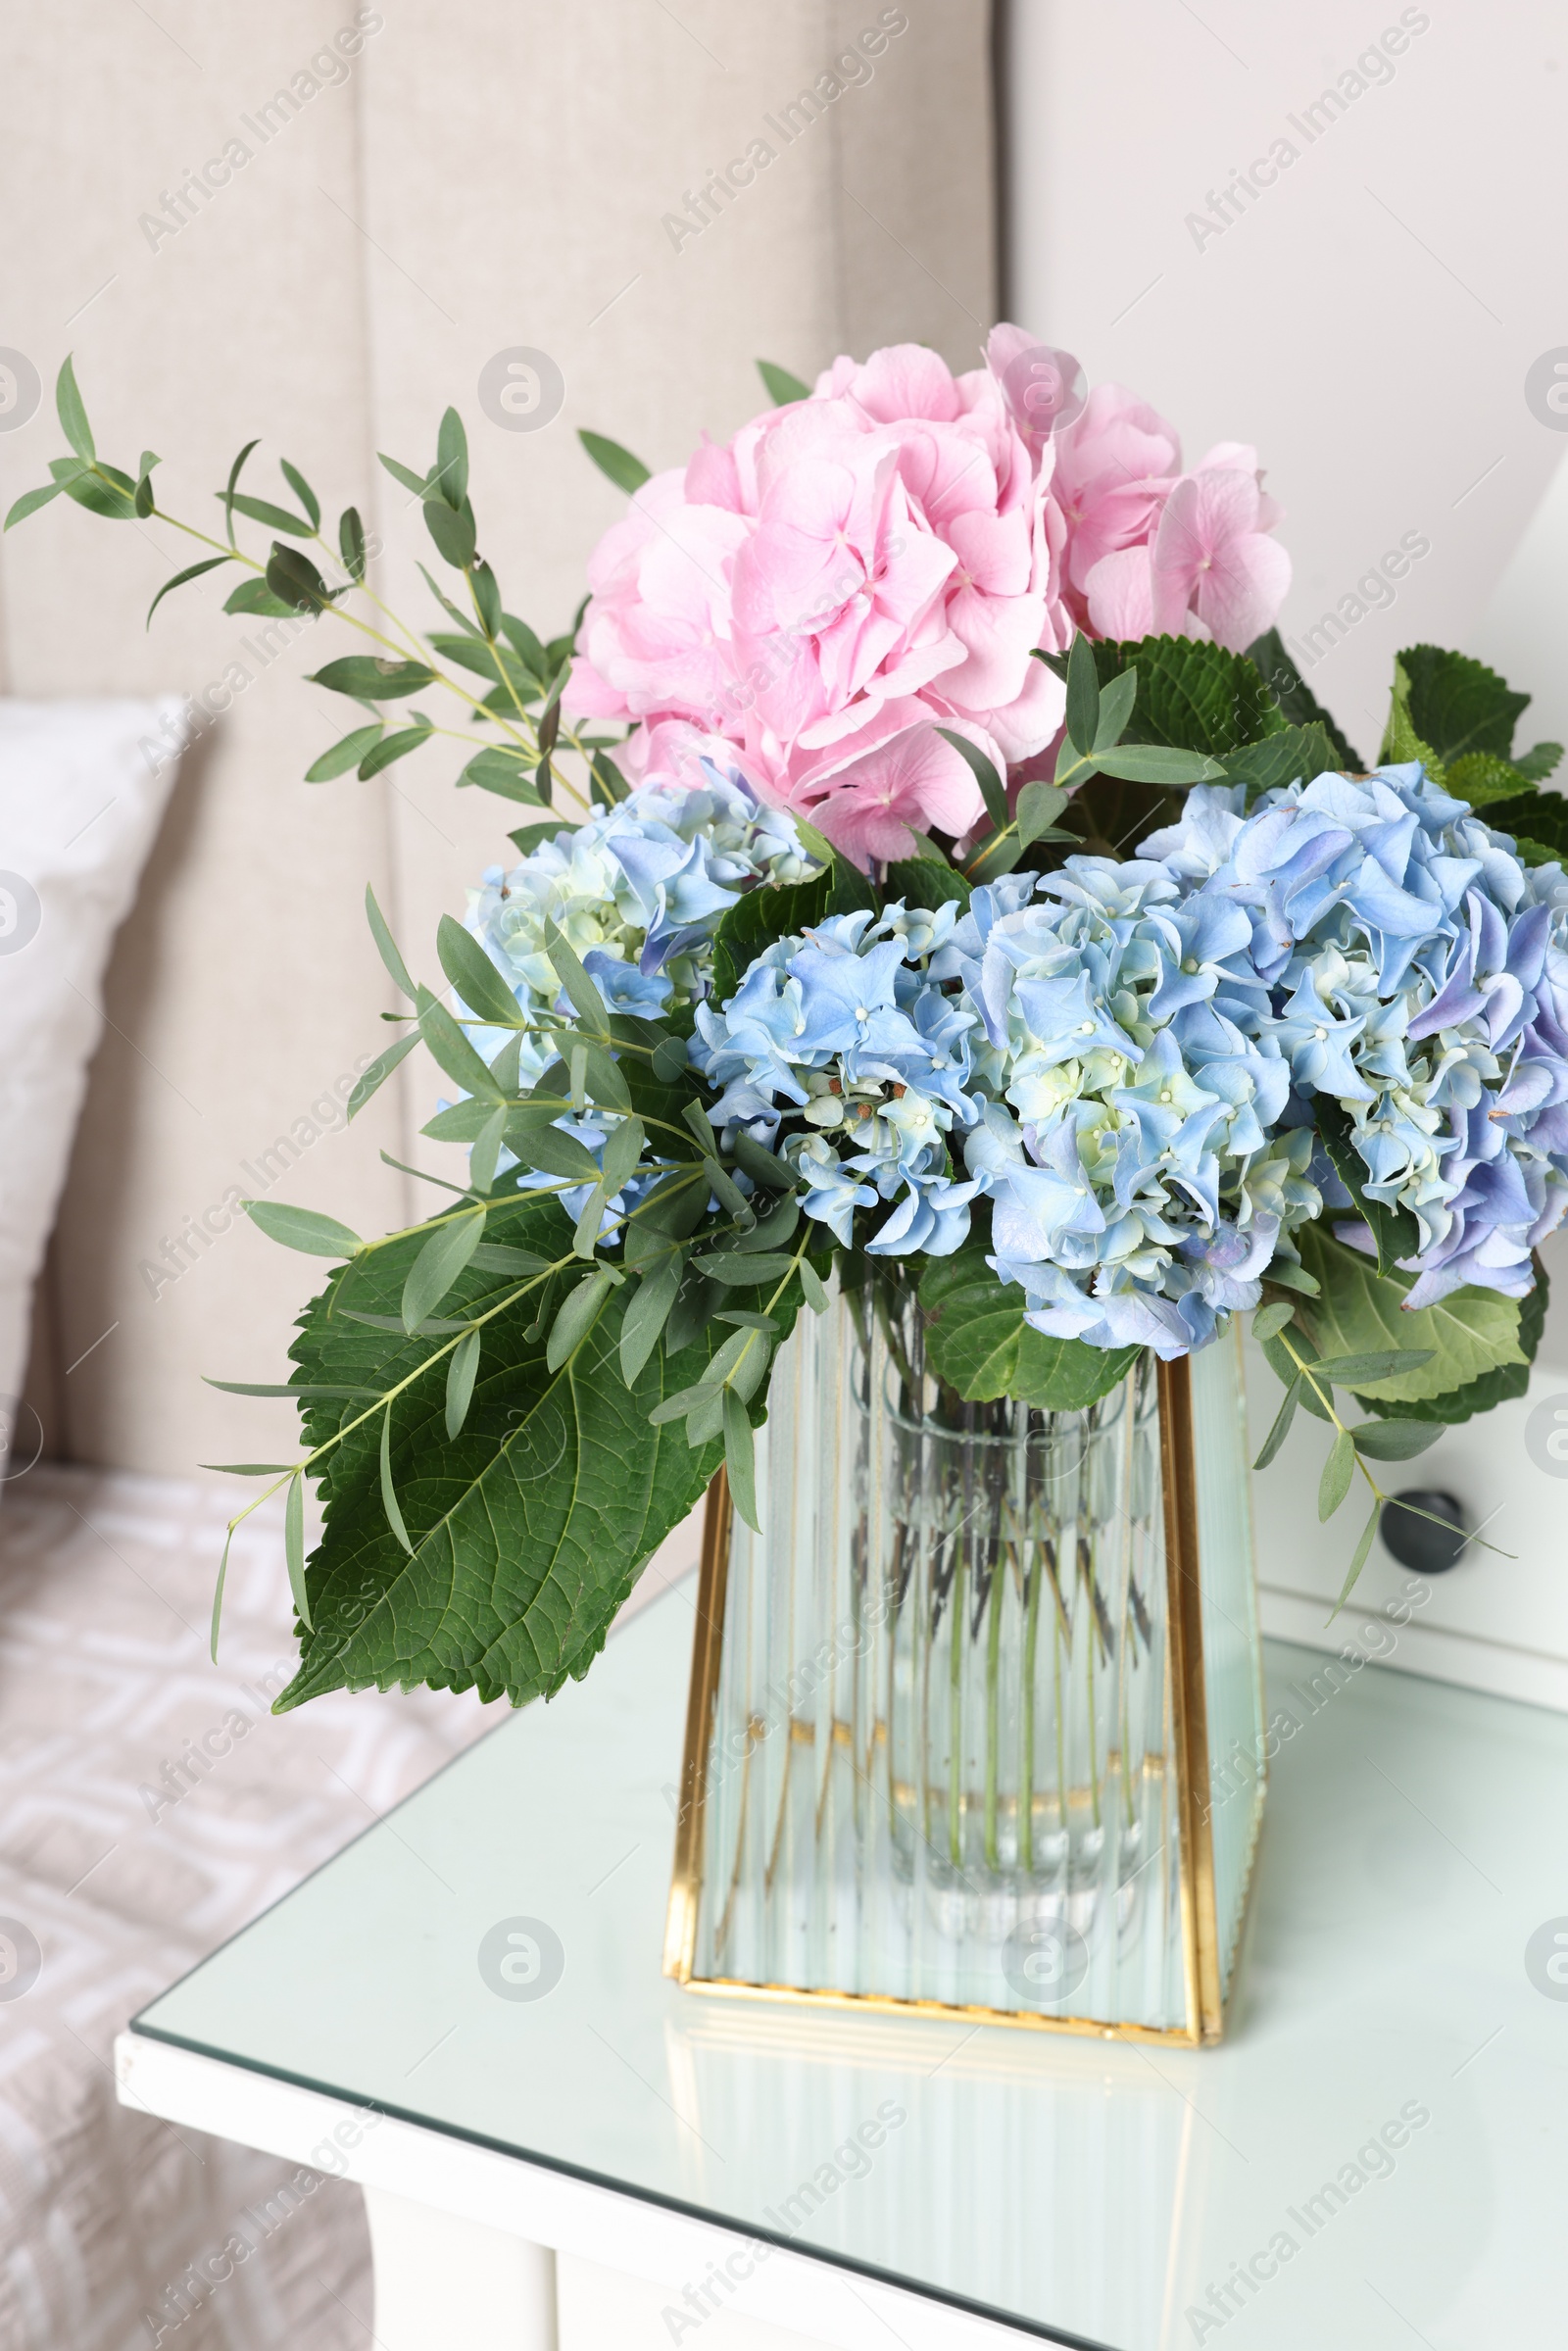 Photo of Blooming hortensia flowers in vase on white table indoors